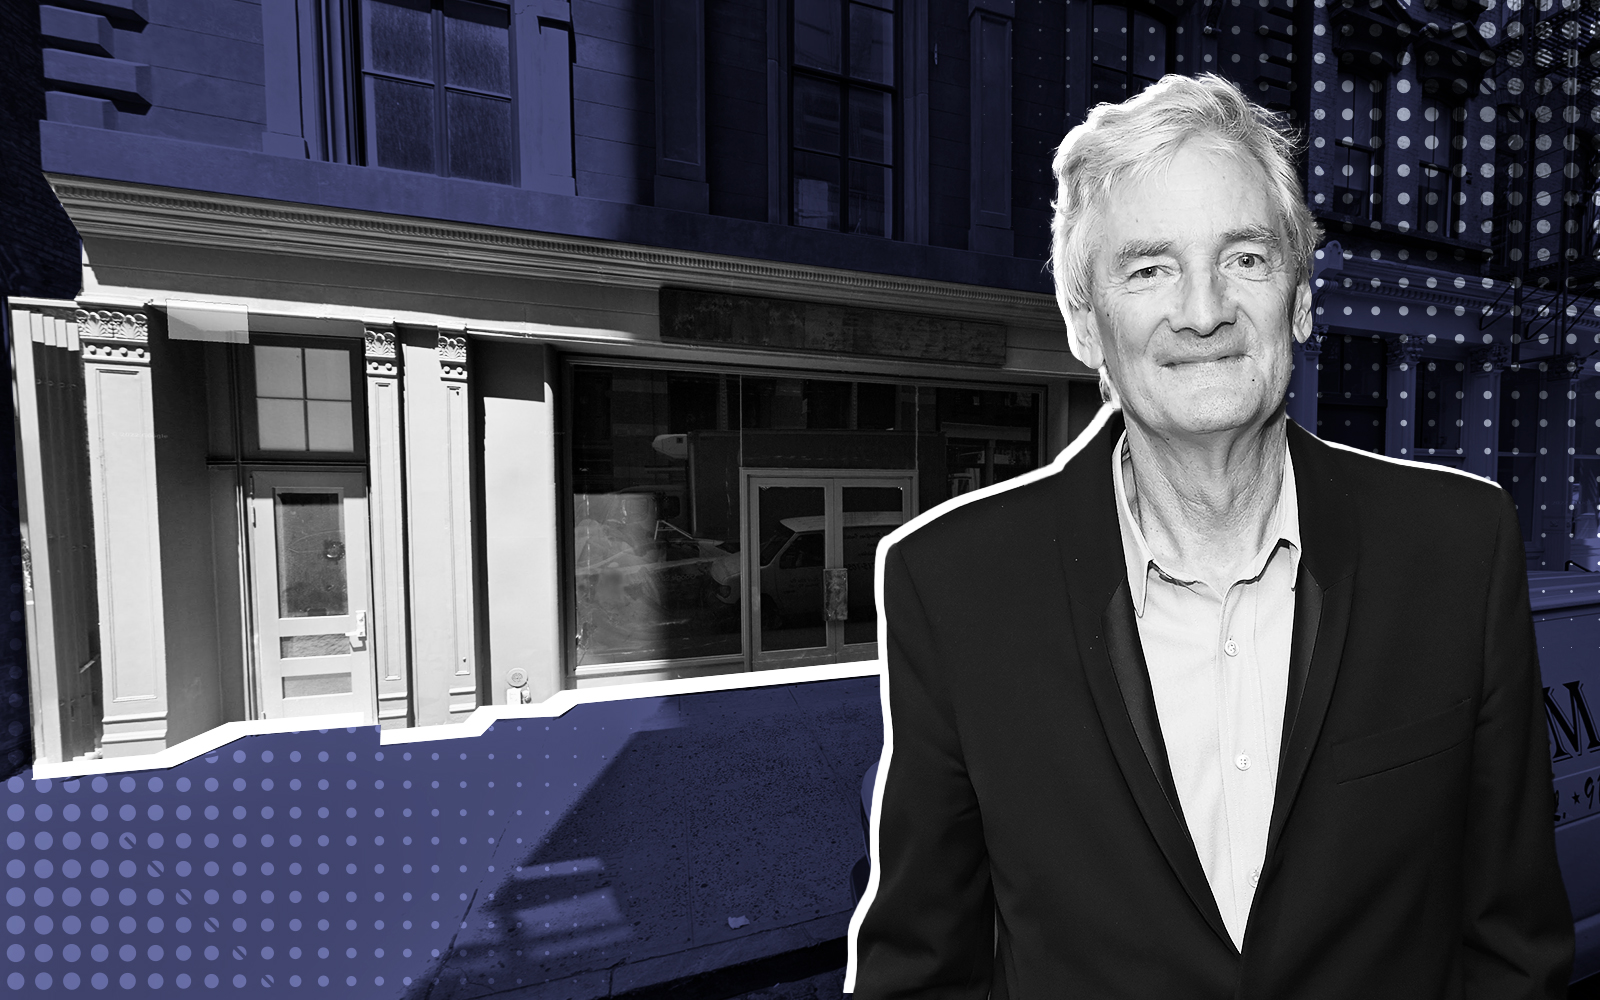 James Dyson buys $60M Soho building at deep discount